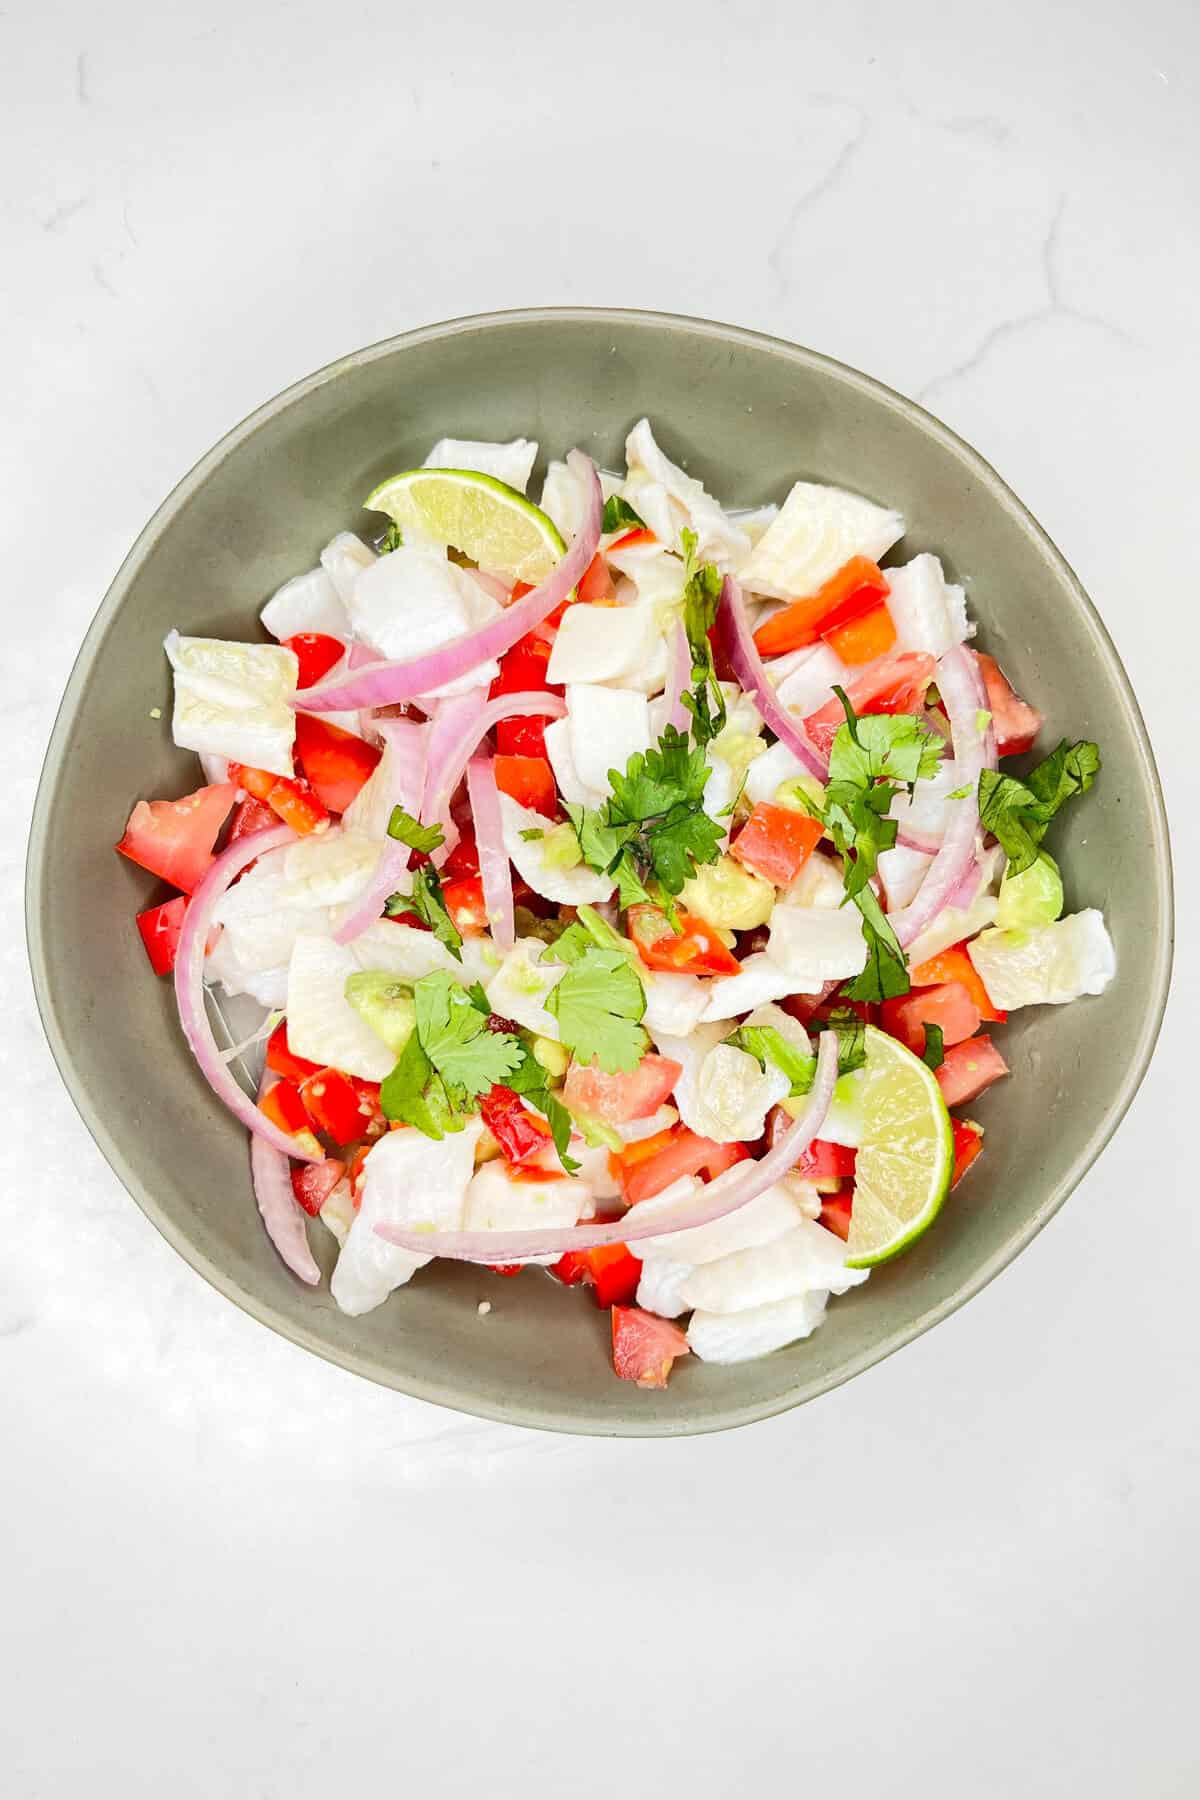 Finished ceviche in a bowl, ready to be served.